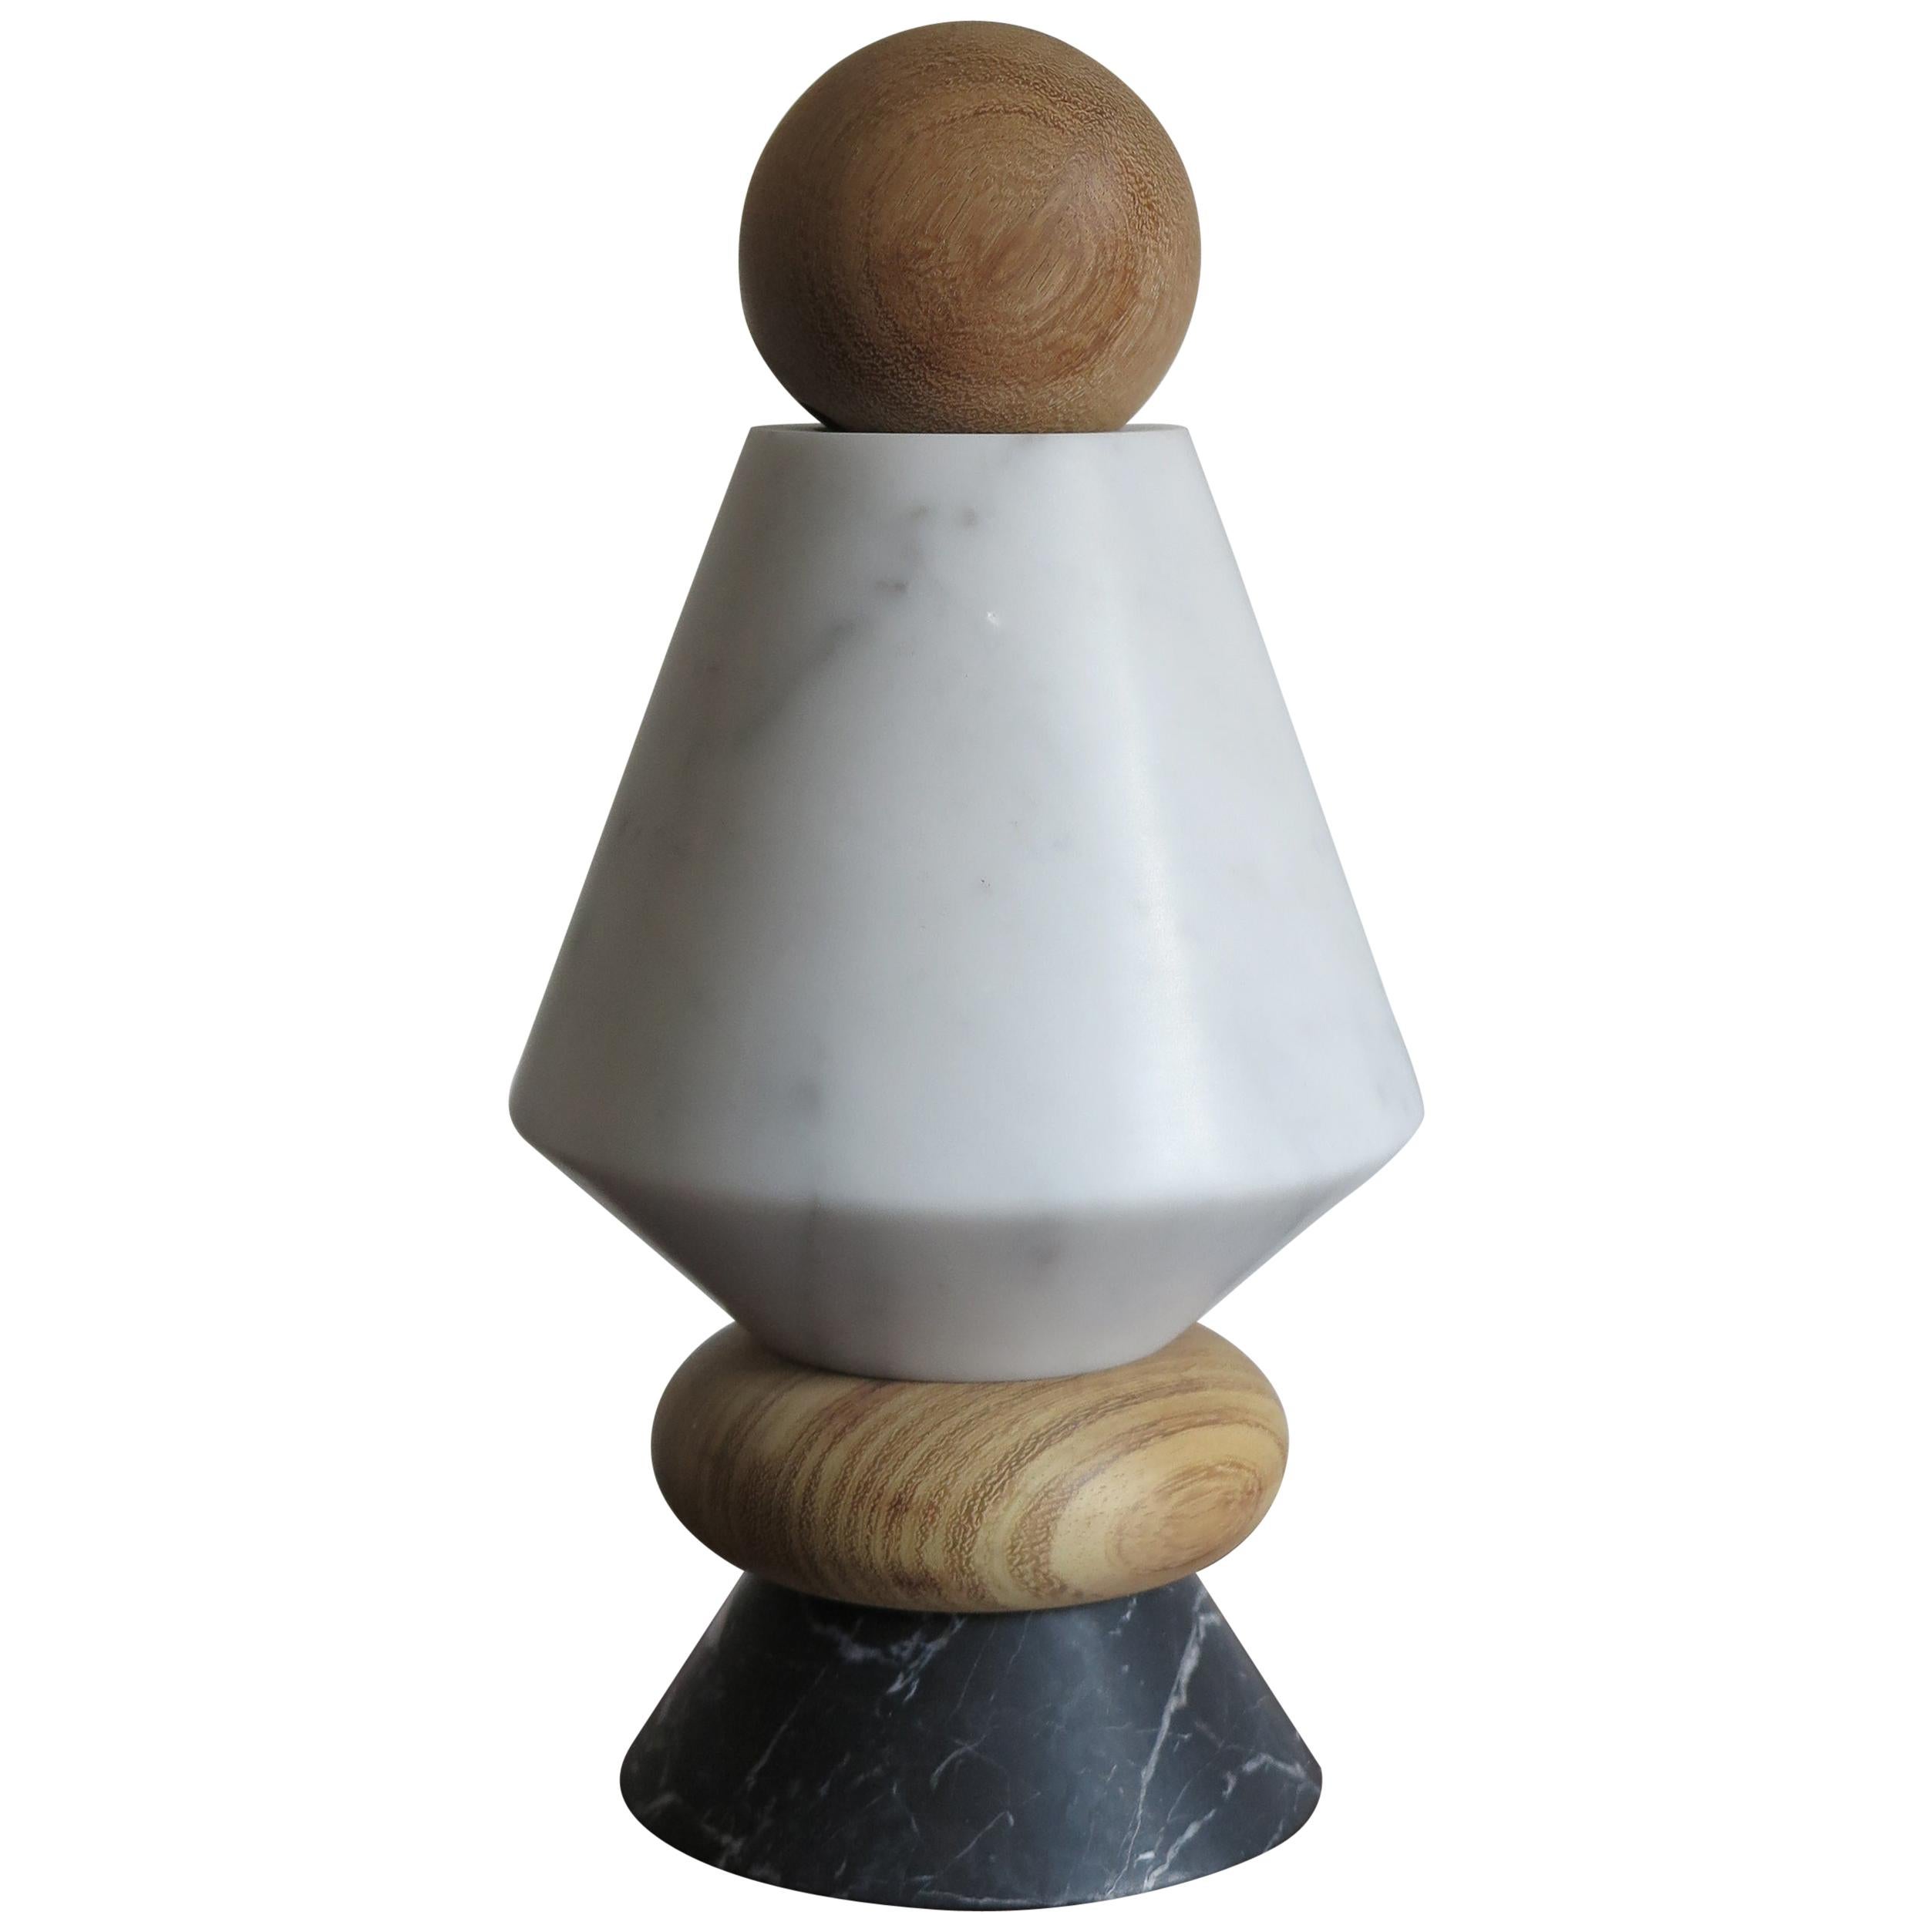 Contemporary Marble and Wood Sculpture, Candleholders, Flower Vase itotem